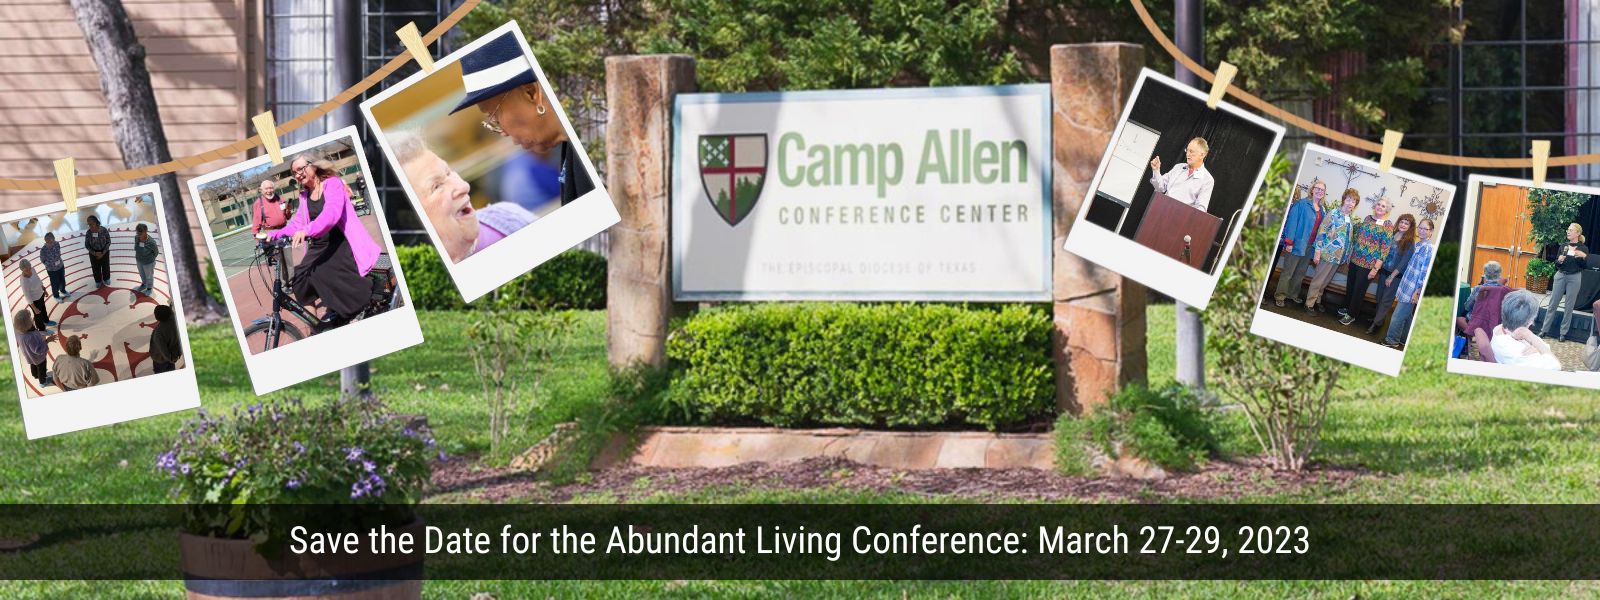 Save the date for the Abundant Living Conference March 27-29, 2023